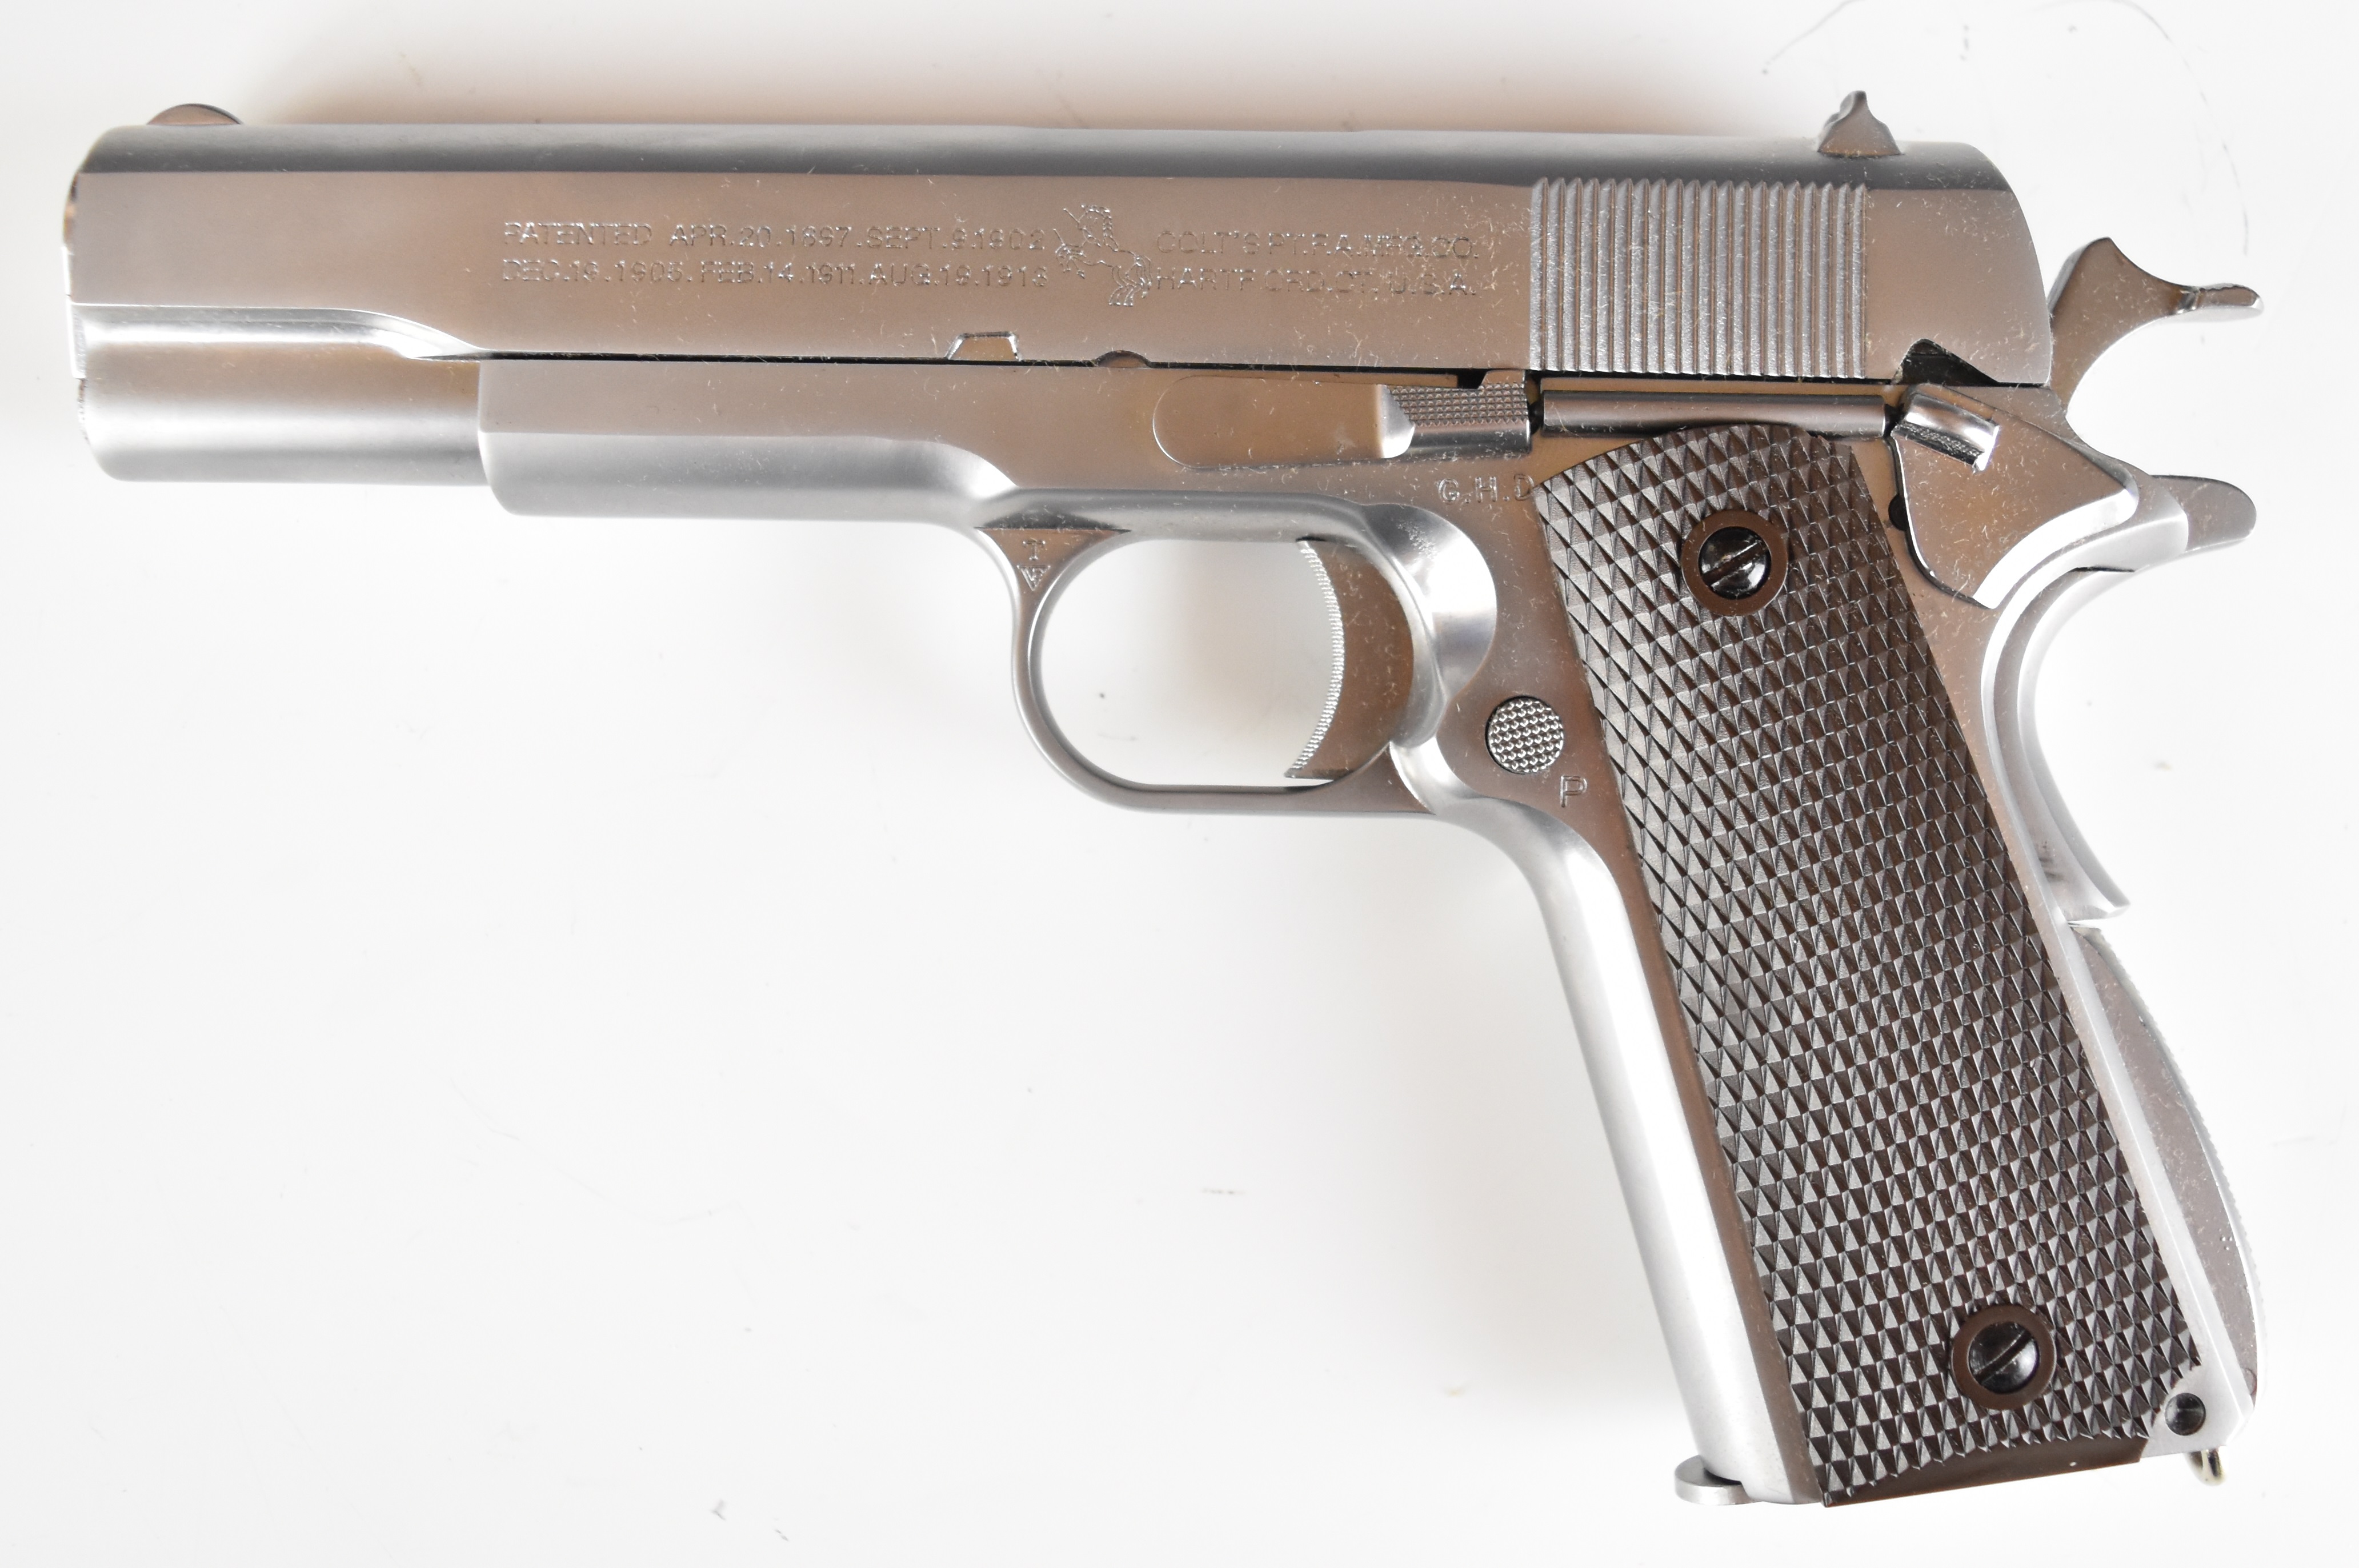 Cybergun Colt 1911 6mm CO2 airsoft pistol with chequered faux wooden grips, multi-shot magazine - Image 3 of 16